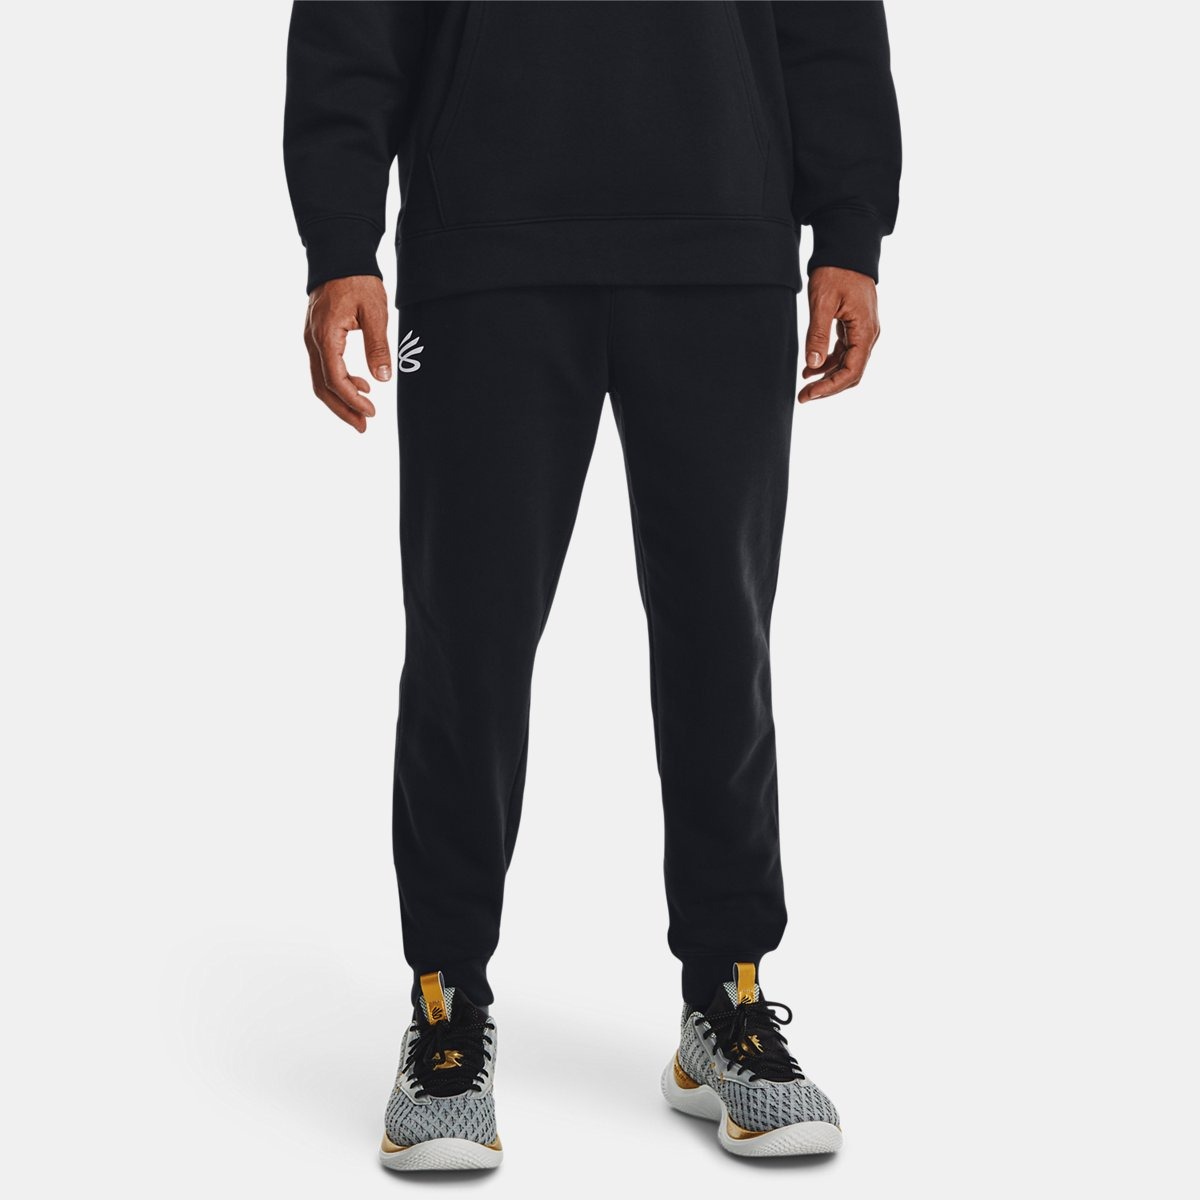 Gents Sweatpants in Black at Under Armour GOOFASH